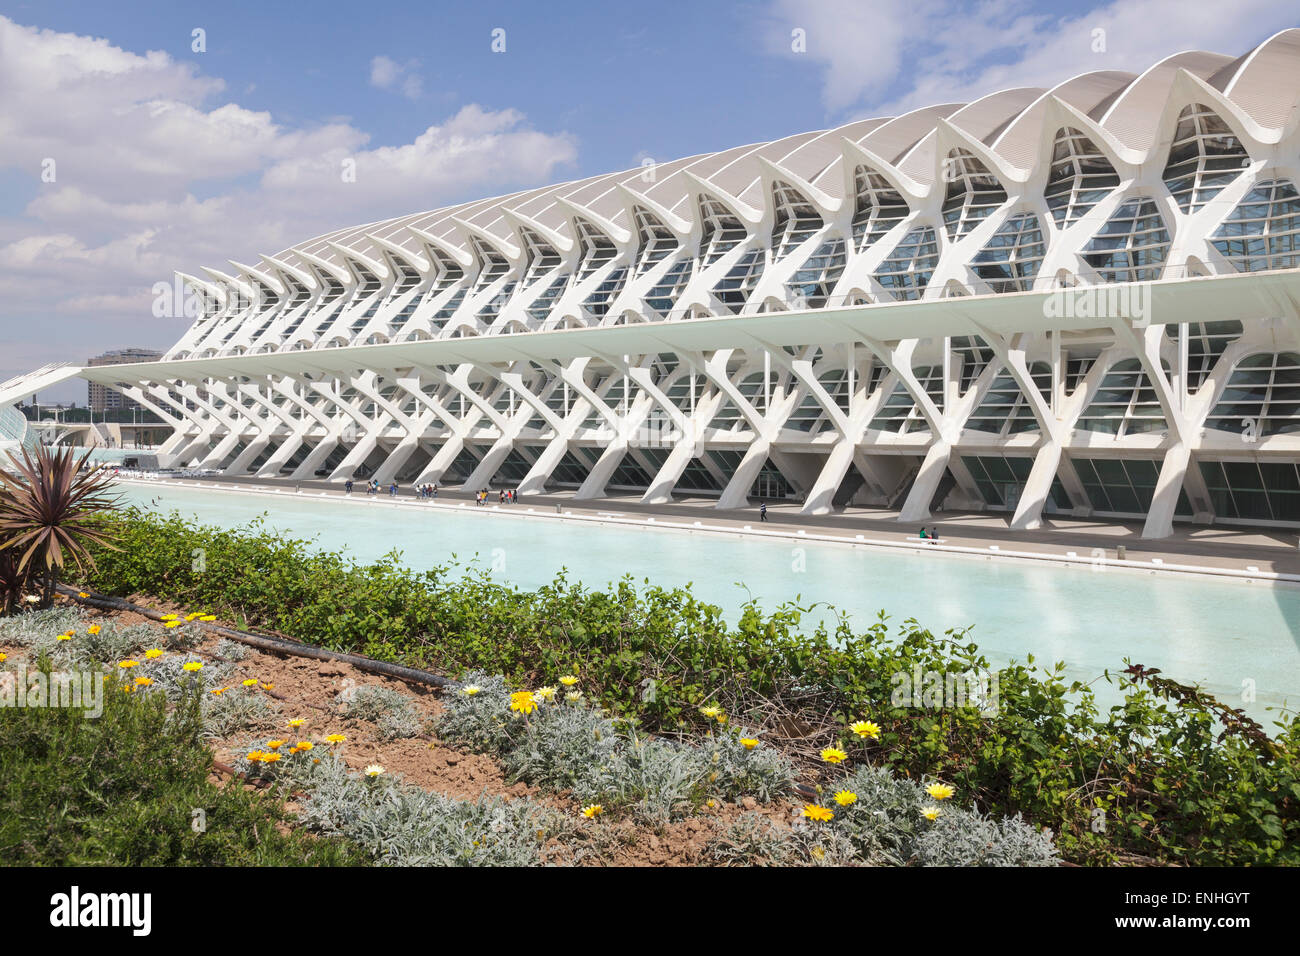 The City of Arts and Sciences,  Science Museum Prince Philip, Valencia, Spain Stock Photo